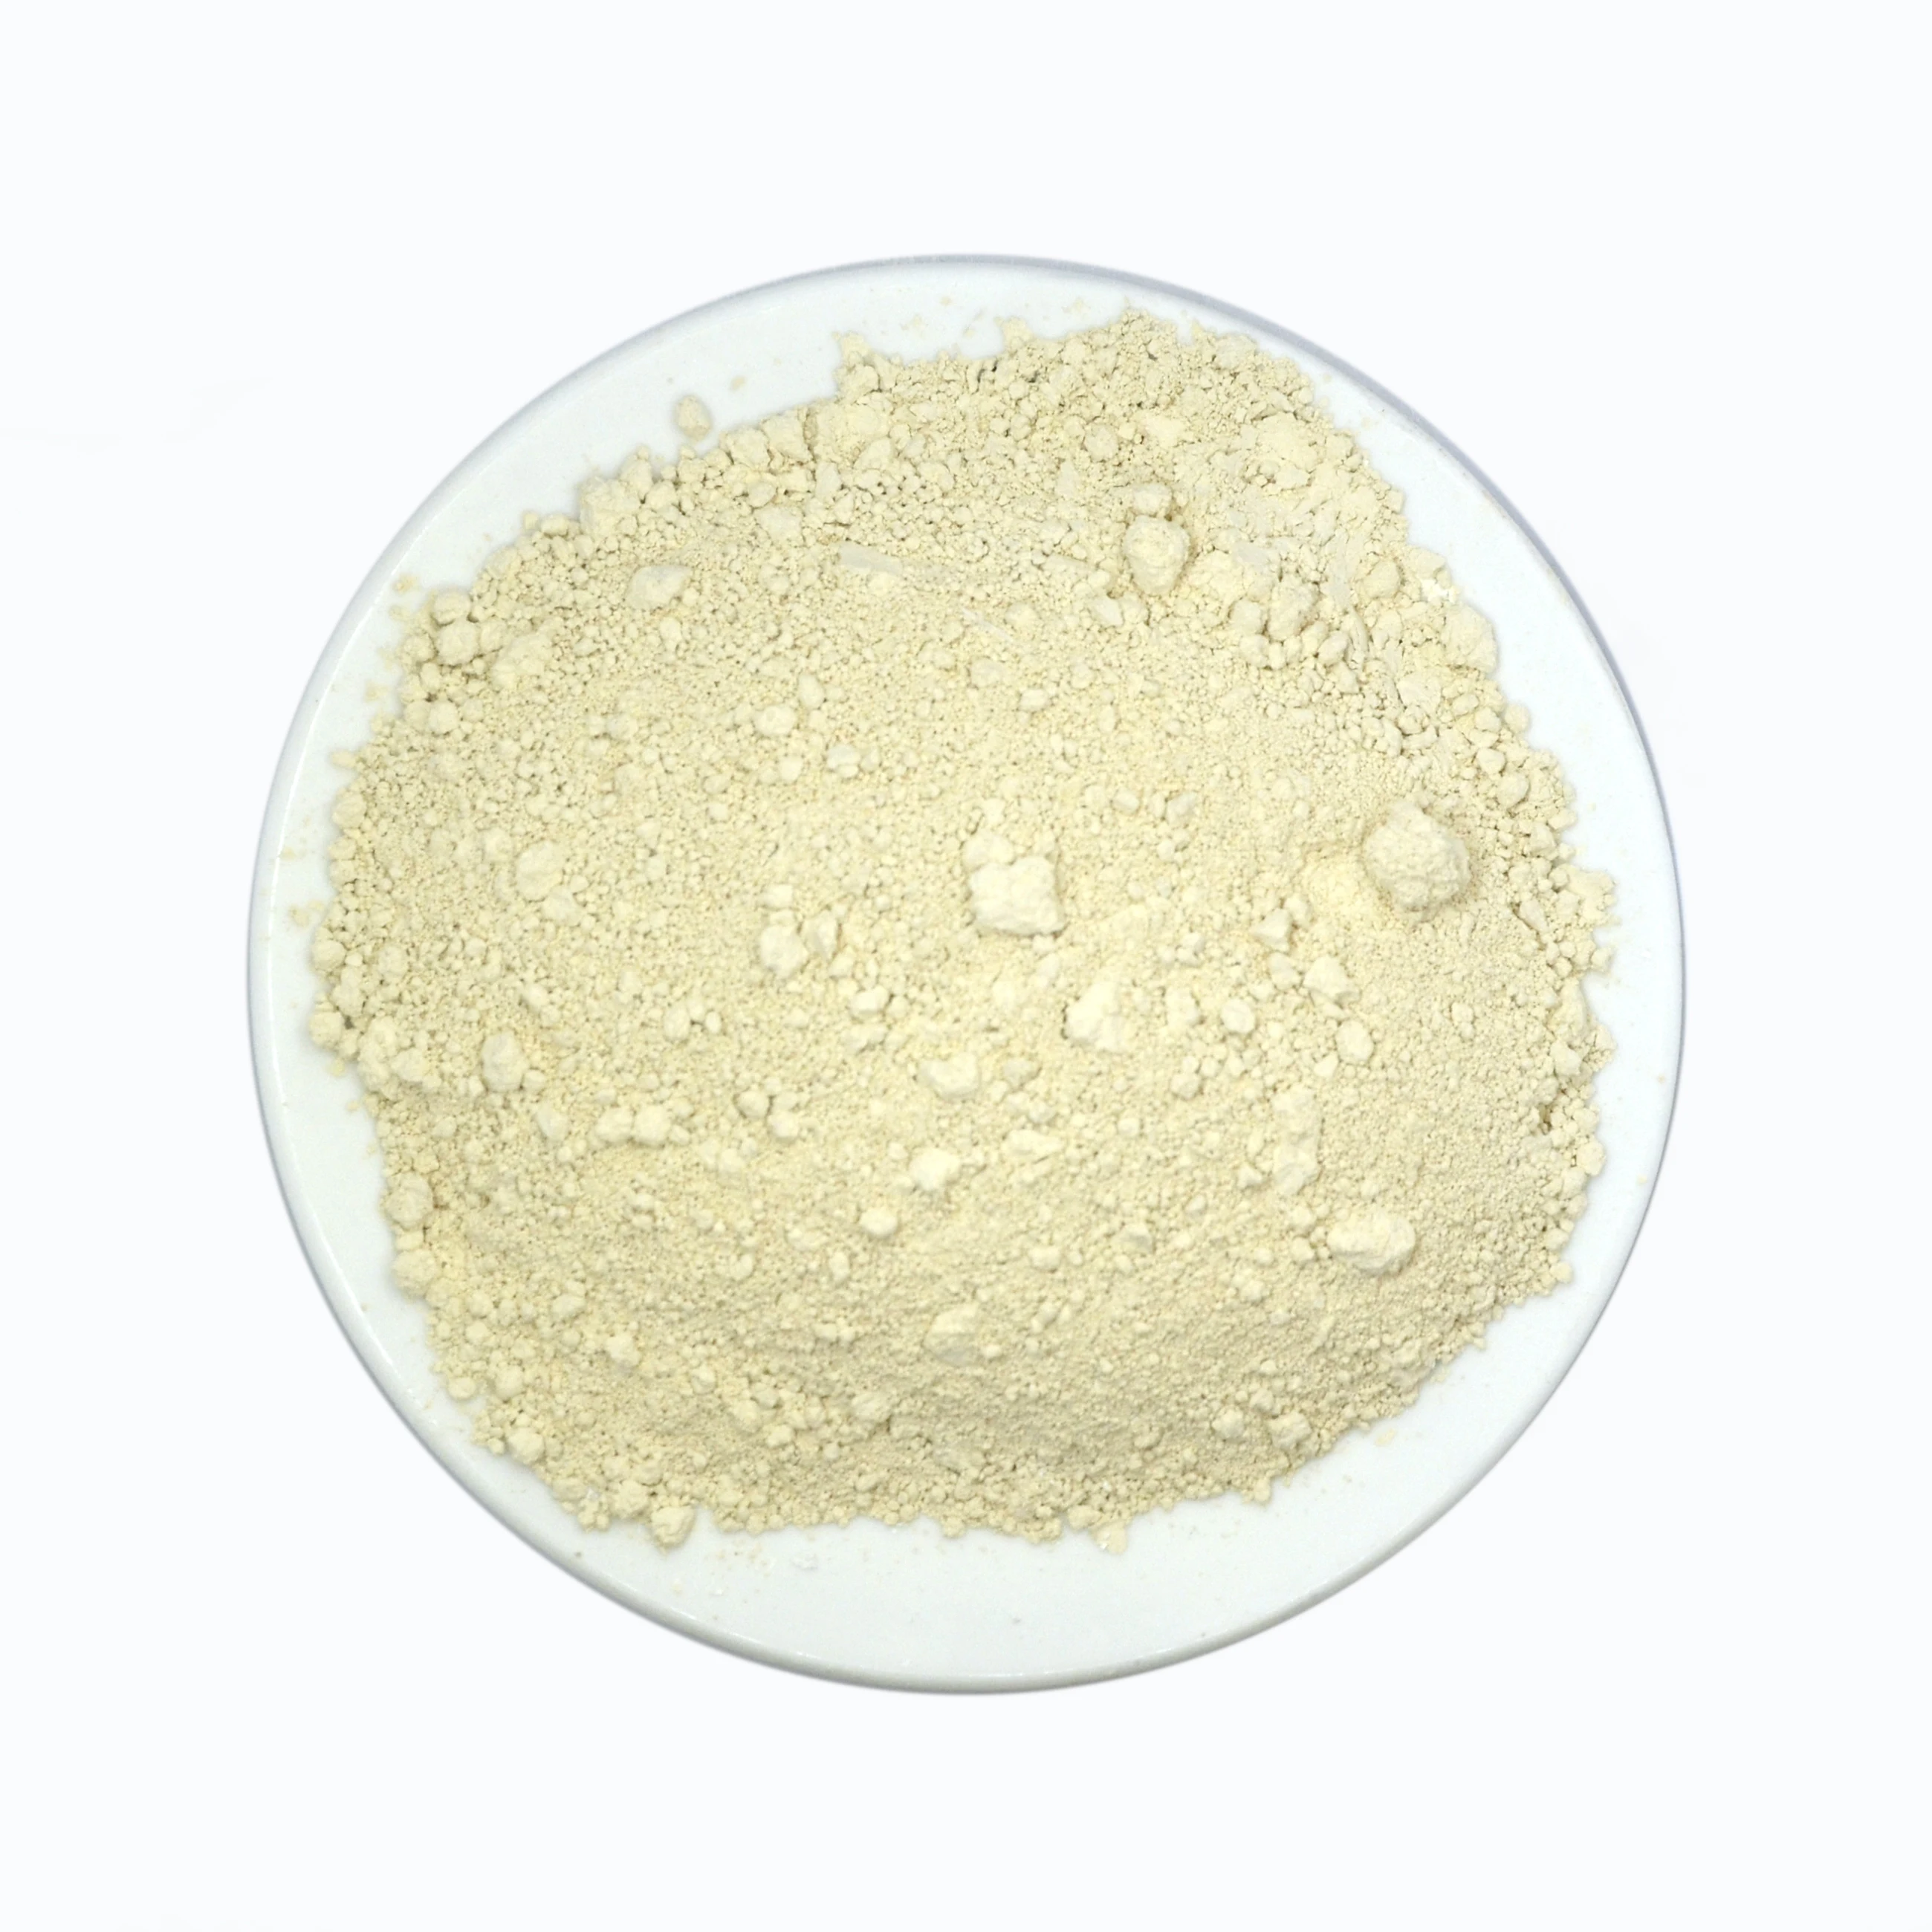 Hot sale per ton calcined washed kaolin porcelain clay powder materials brique for ruber paint coatings ceramics paper